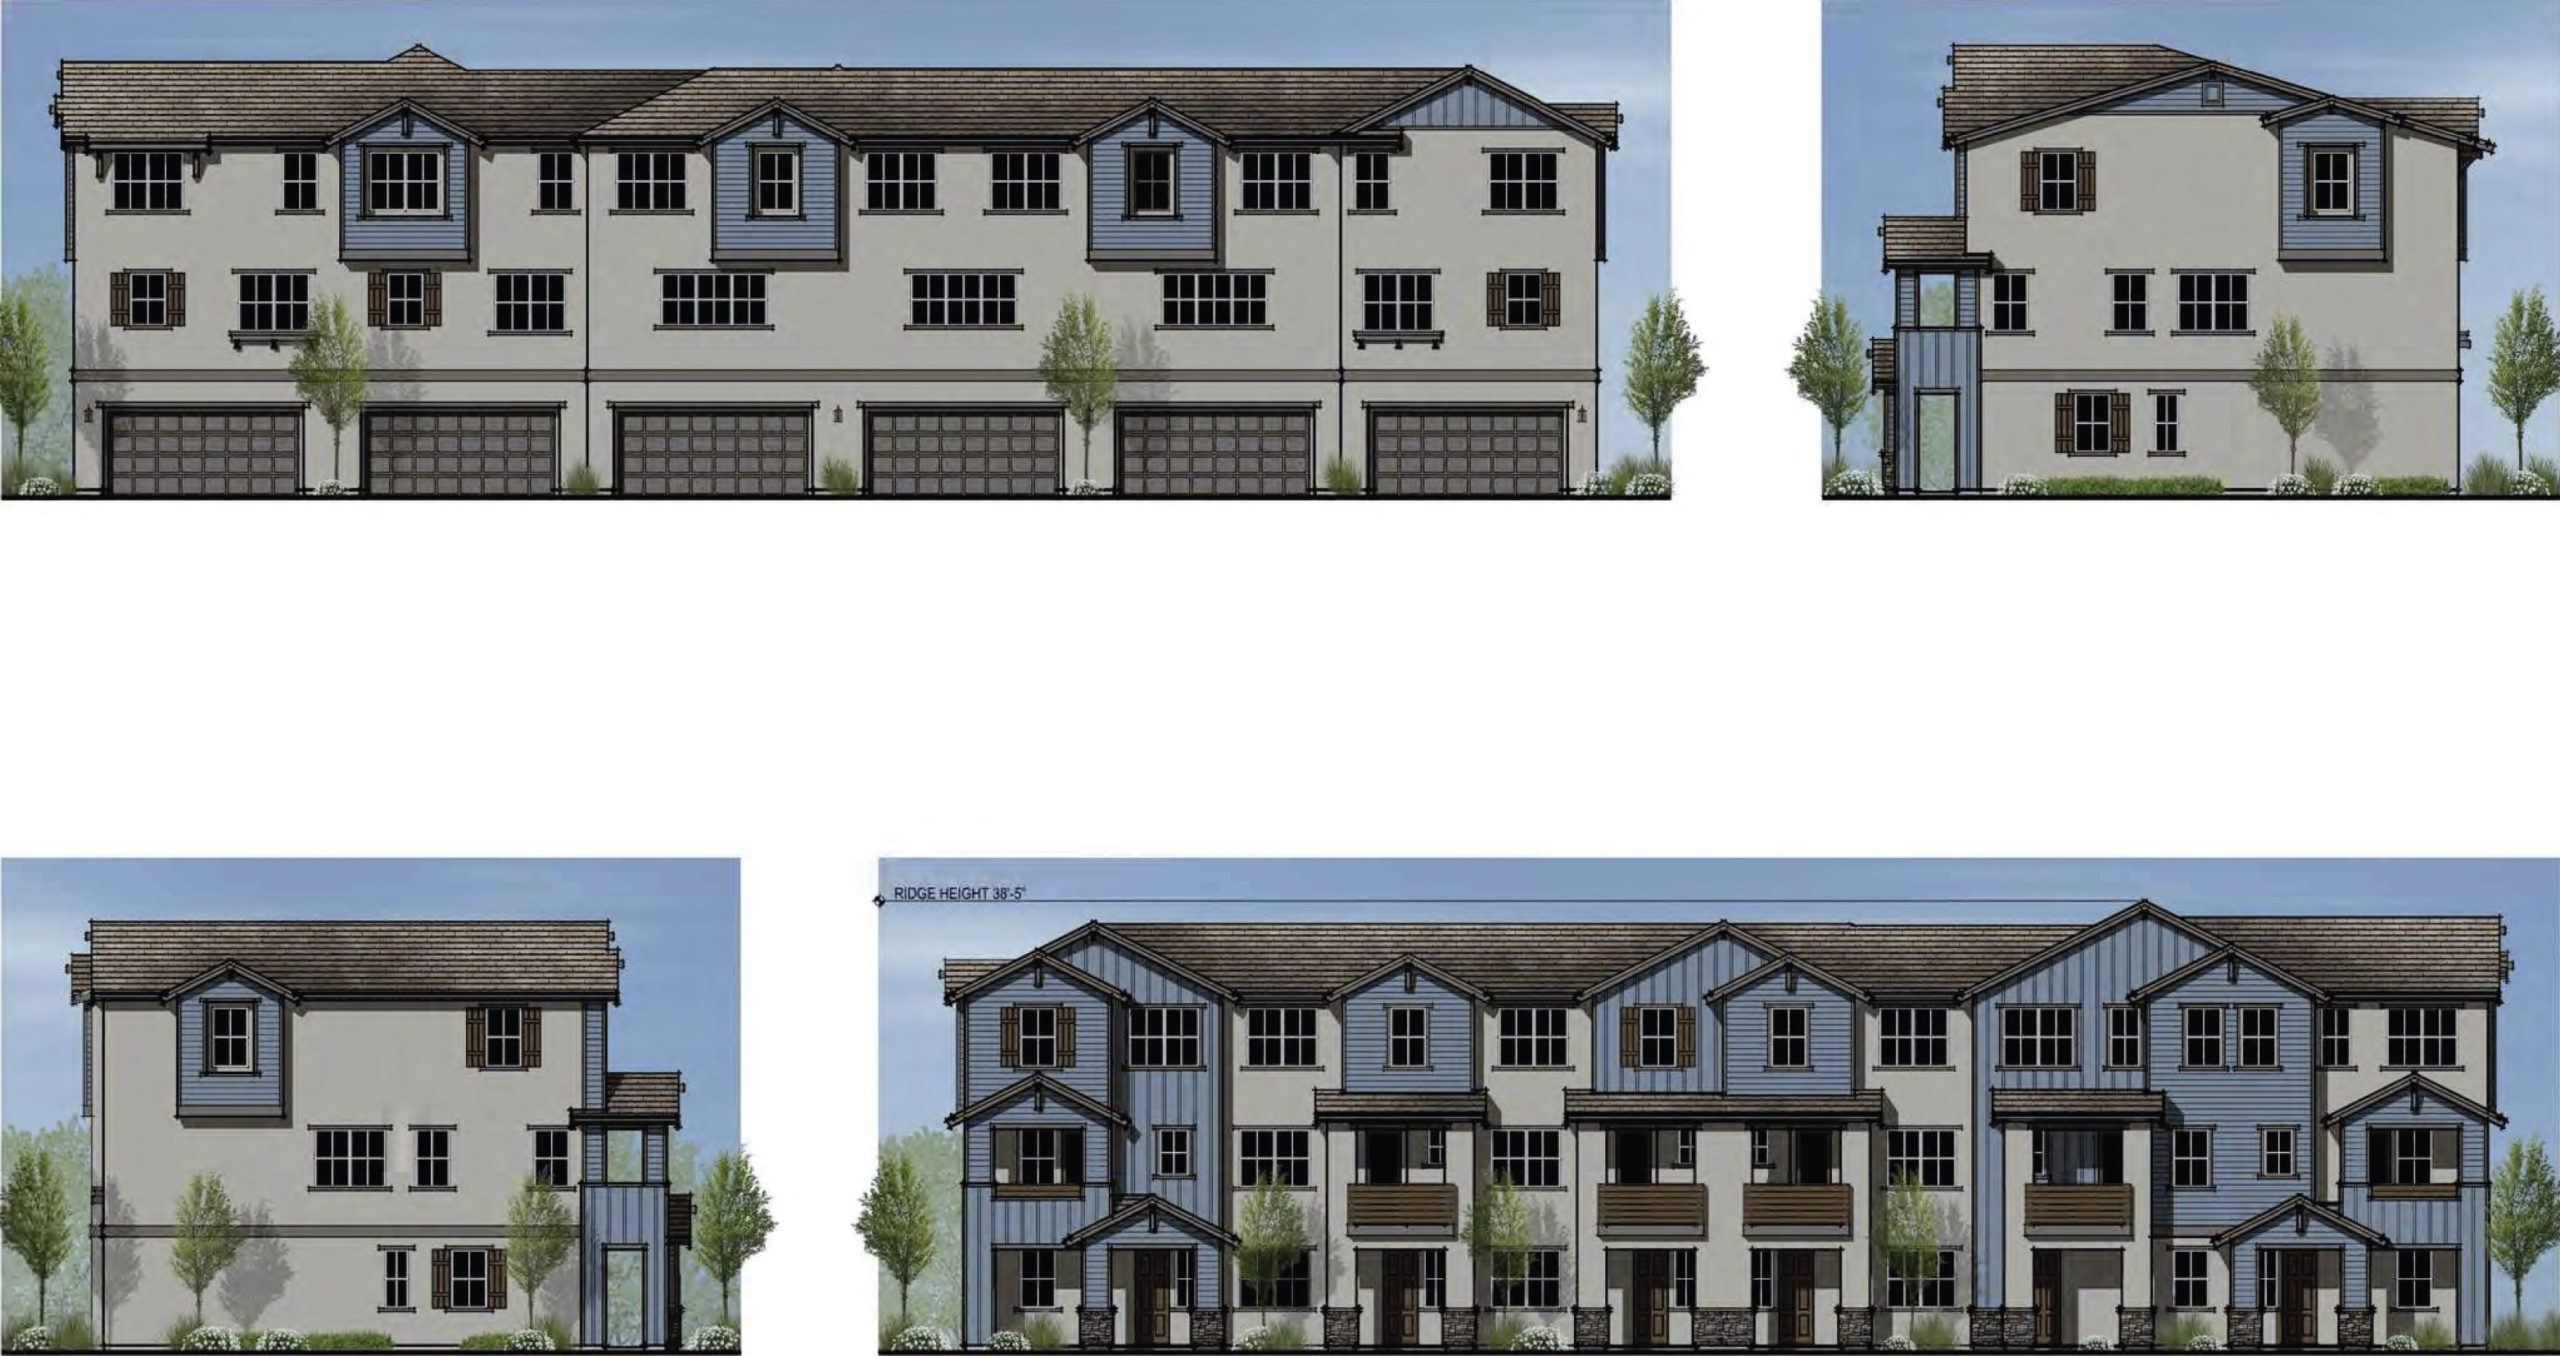 Wild Horse Multifamily facade elevation, design by SDG Architects